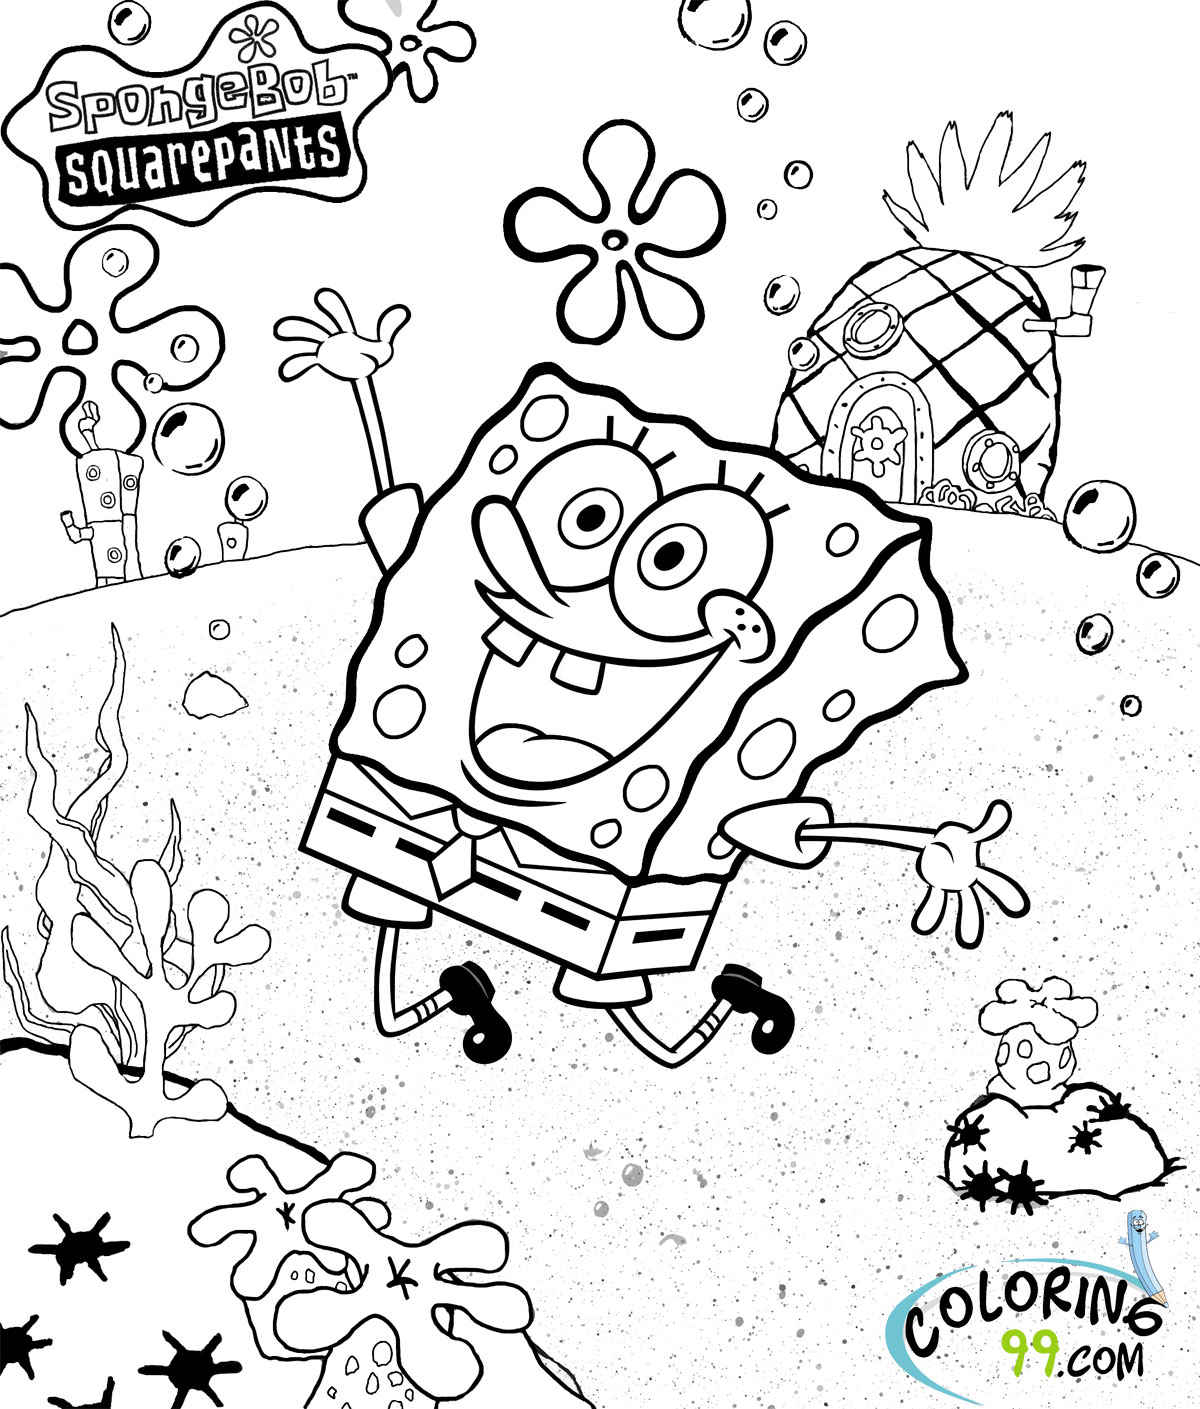 Sponge Bob Square Pants Coloring Pages - Coloring Pages For Toddlers